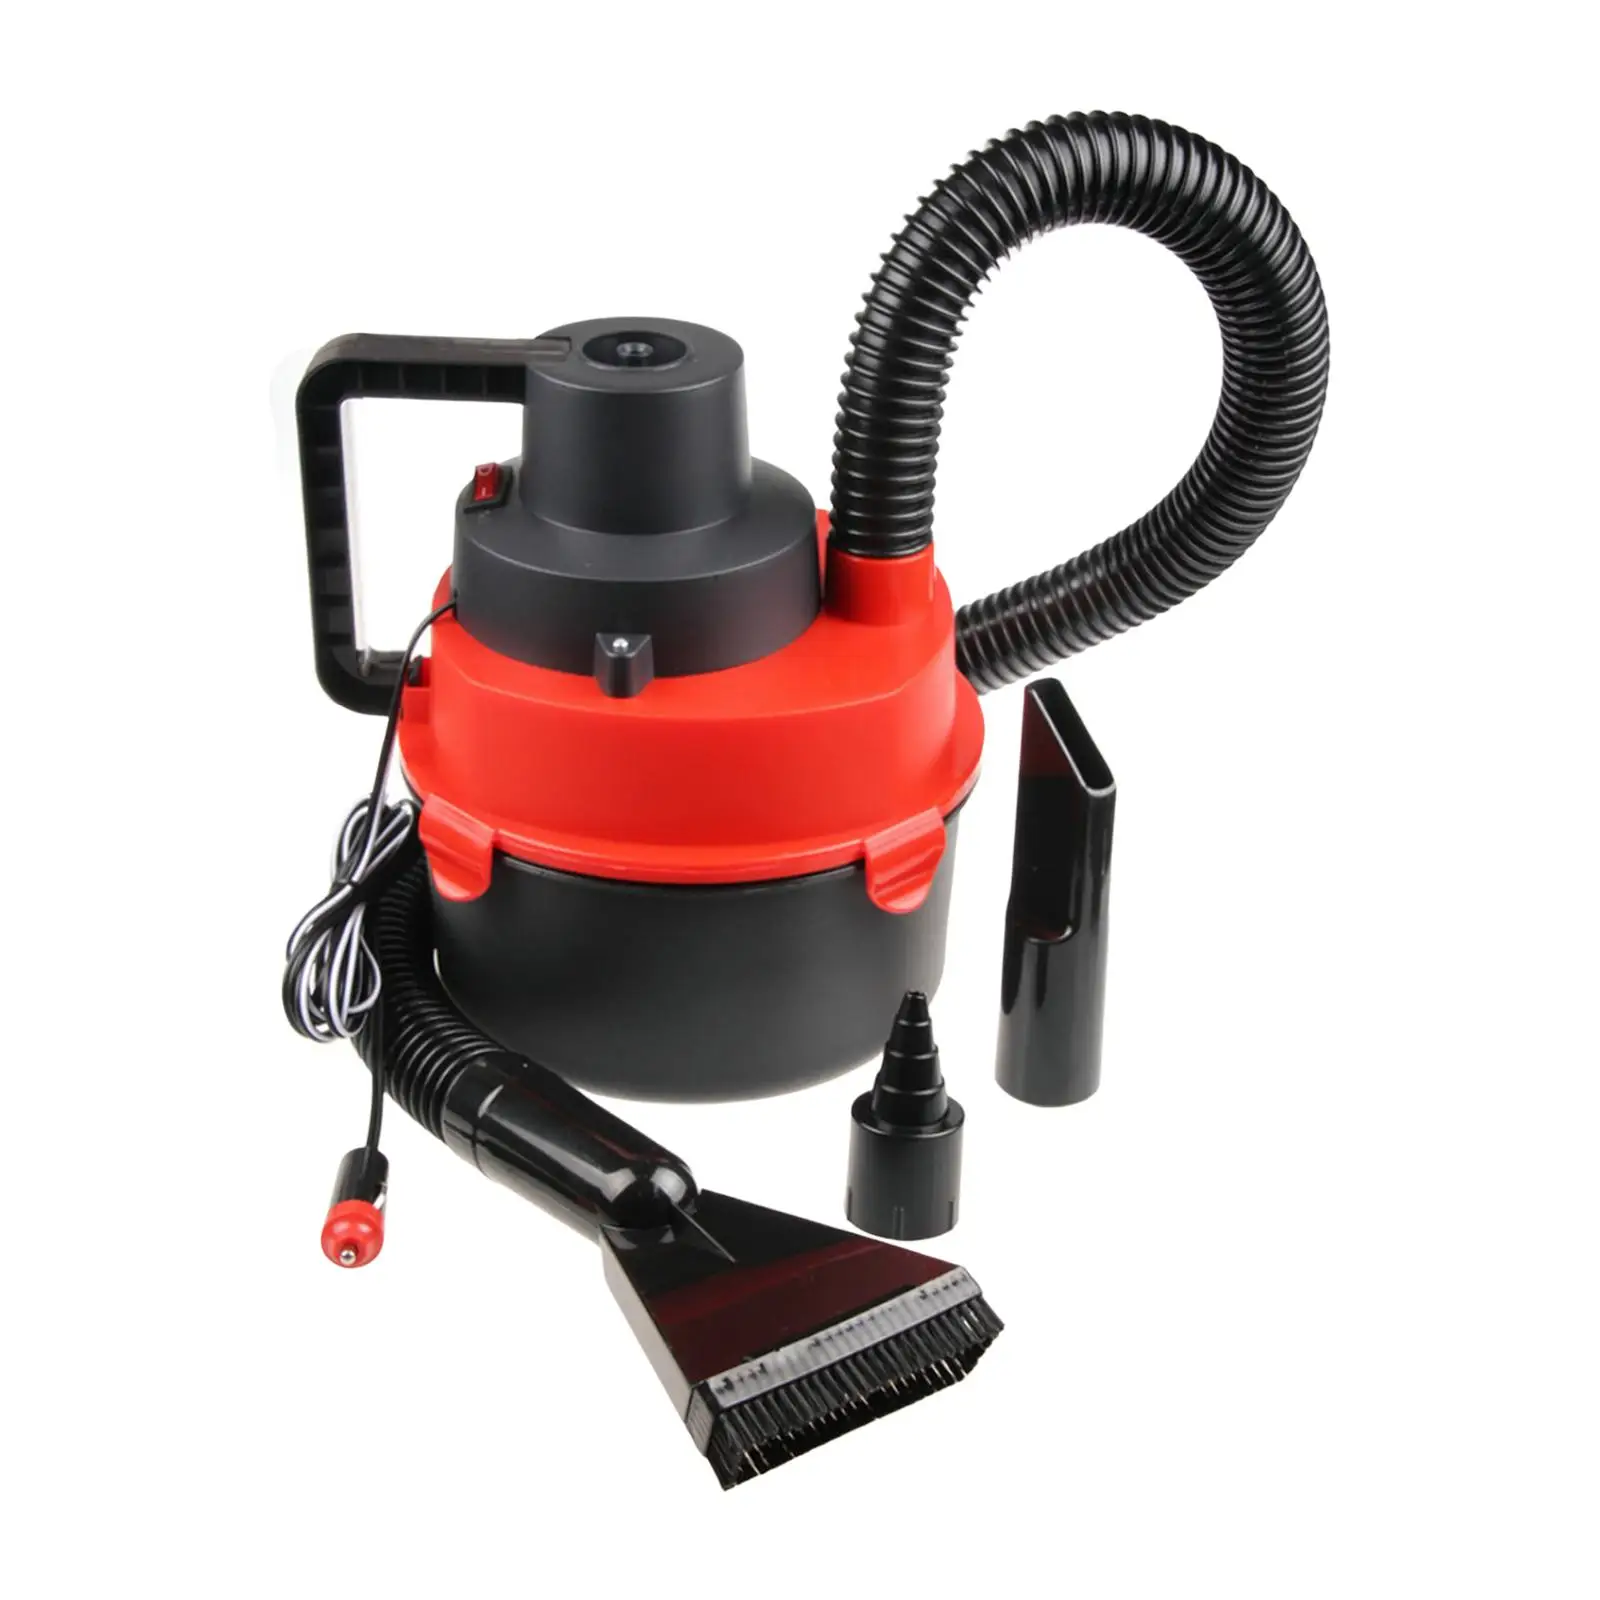 12 Volt Wet Dry Car Auto Canister Vacuum 4L Capacity Professional Flexible Hose for Truck Van Red and Black Portable Low Powered